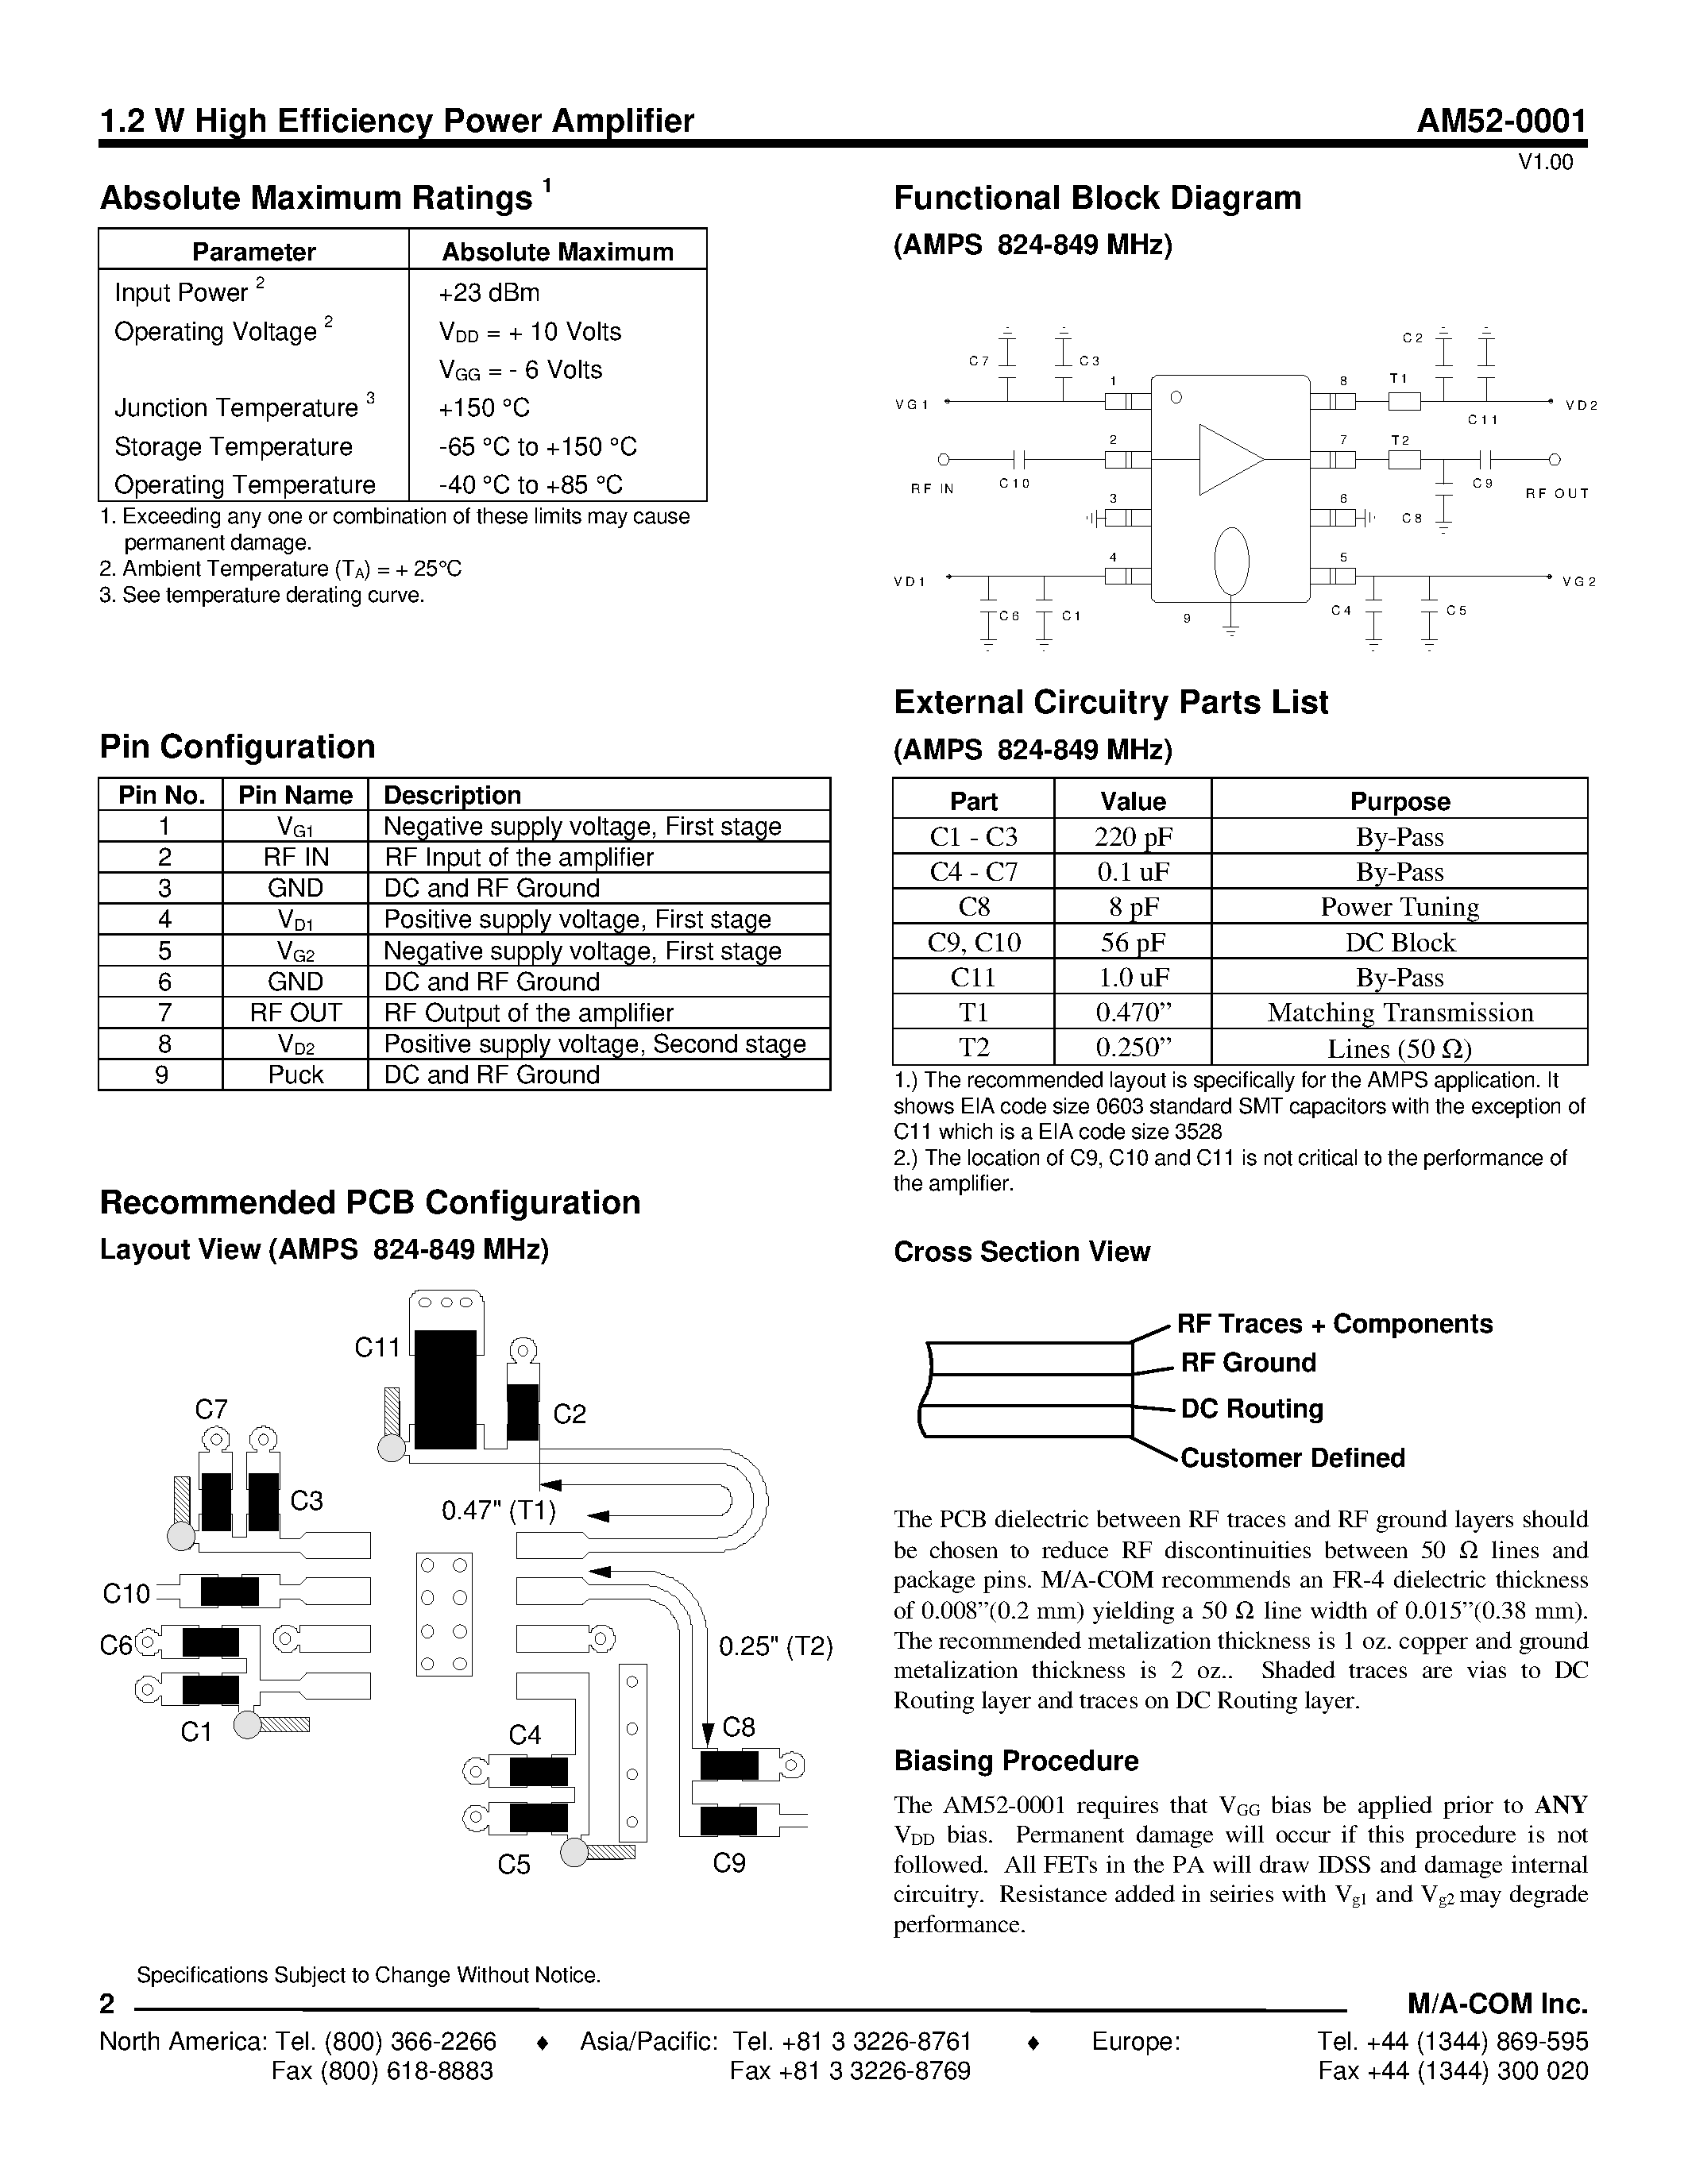 Datasheet AM52-0001TR - 1.2 W High Efficiency Power Amplifier 800 - 960 MHz page 2